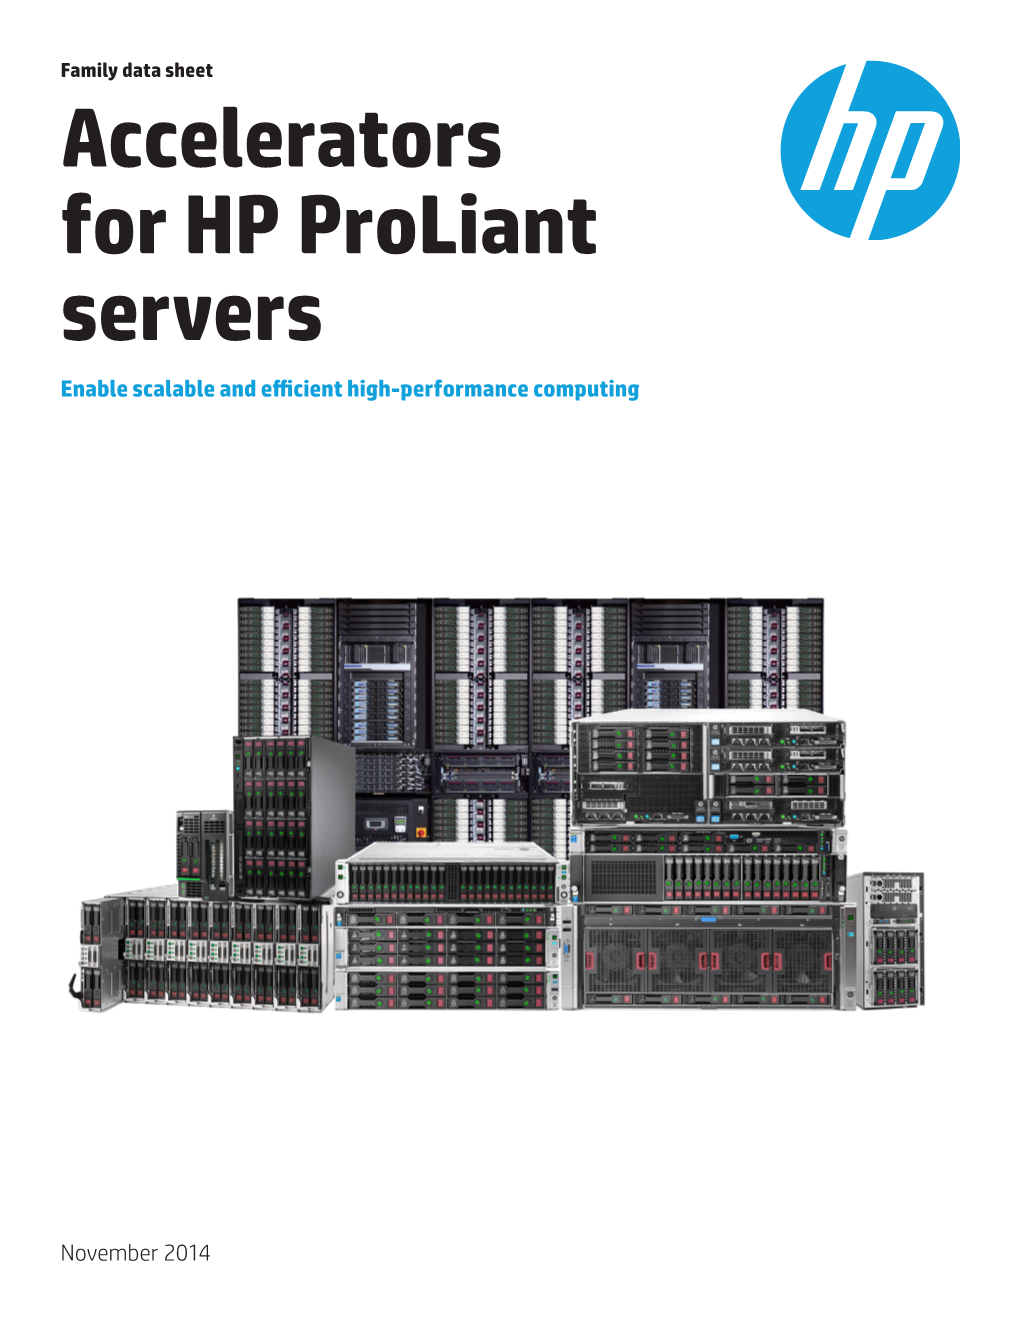 Accelerators for HP Proliant Servers Enable Scalable and Efficient High-Performance Computing